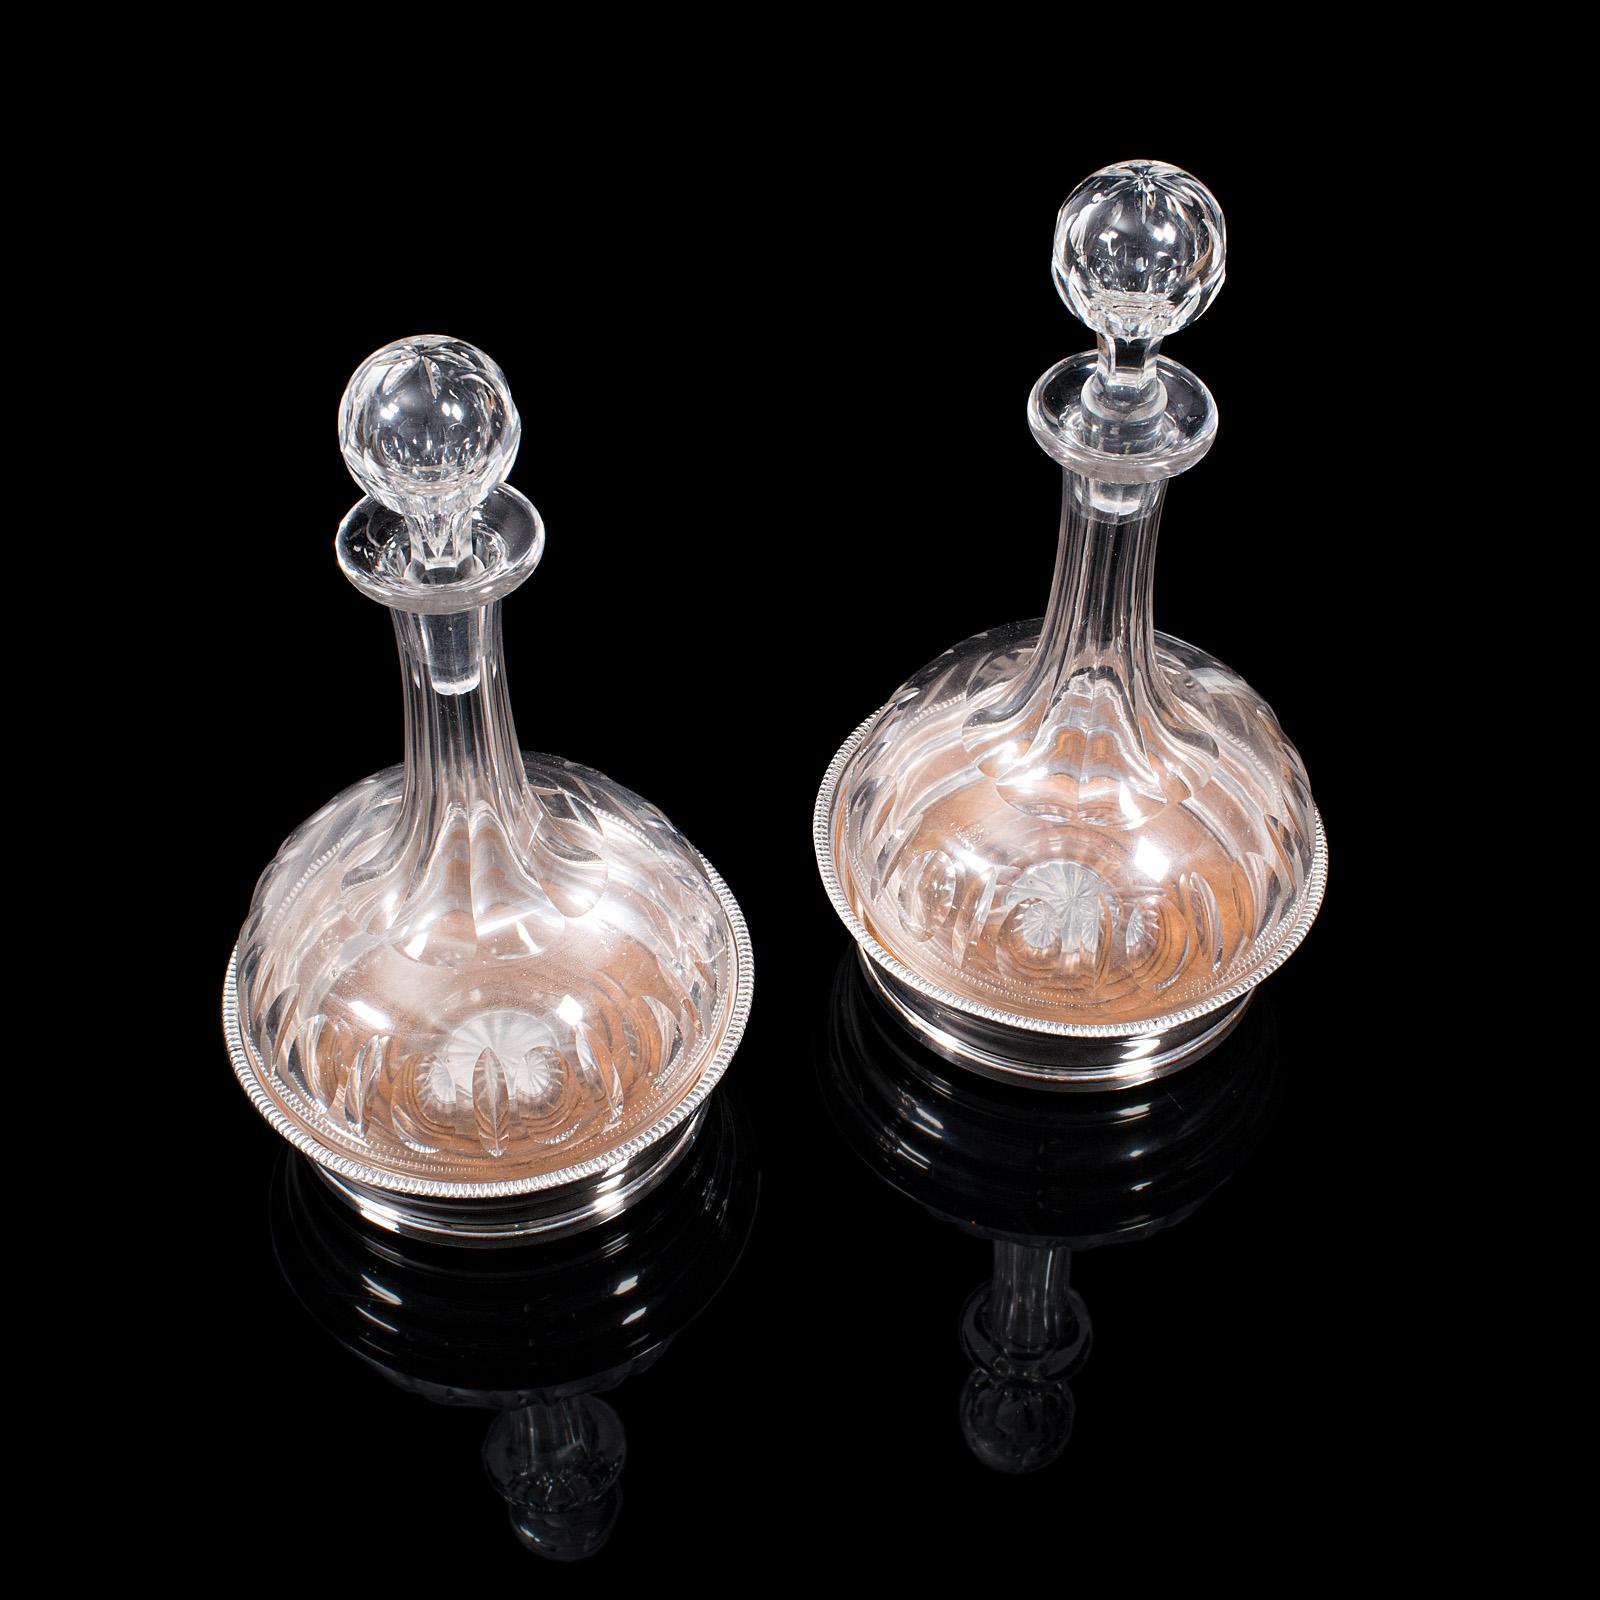 Pair of Antique Decanters and Stands, English, Silver Plate, Edwardian, C.1910 For Sale 1